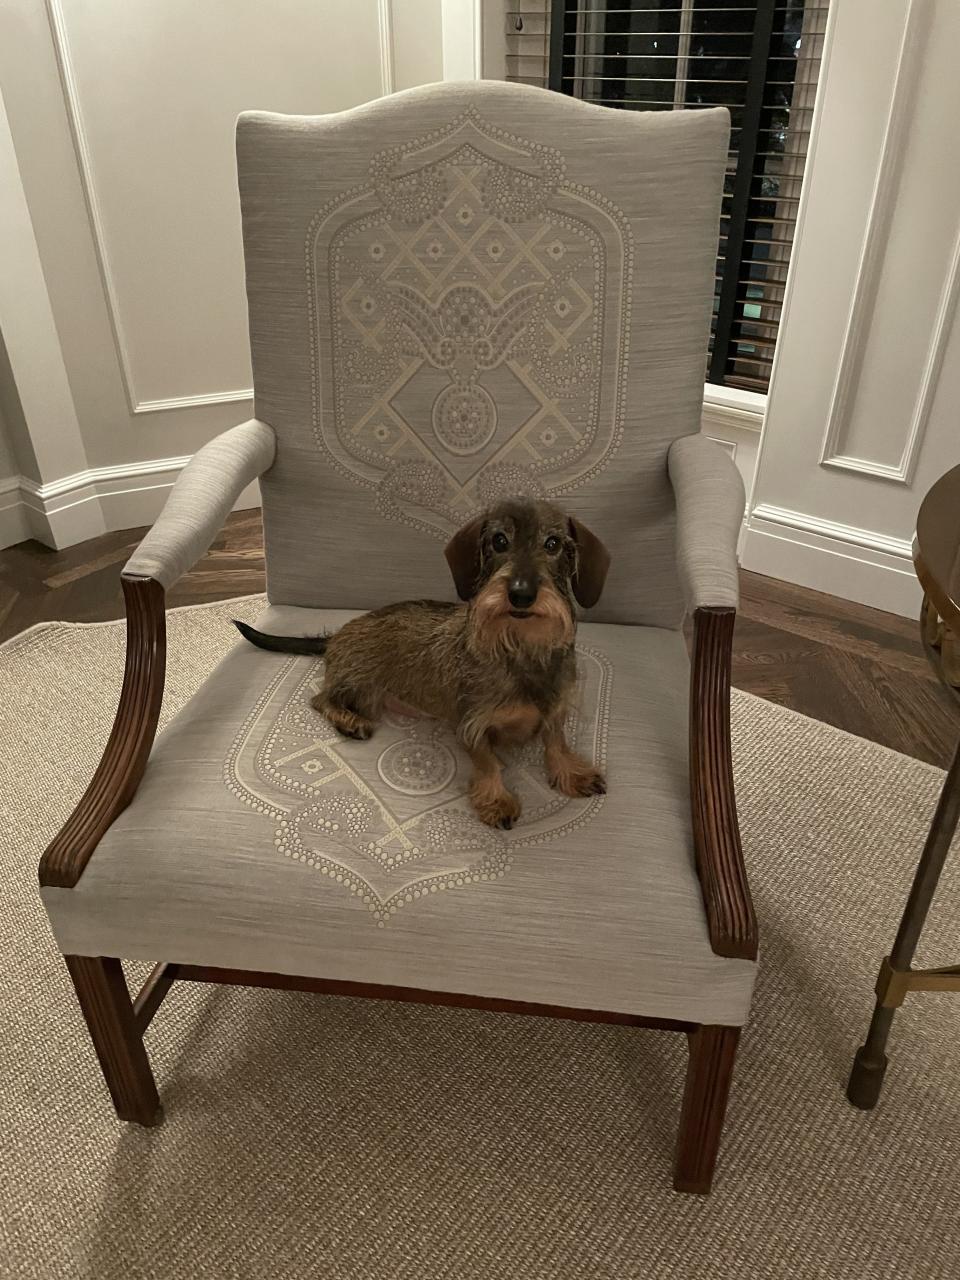 Thom Browne's Gainsborough chair and Hector.